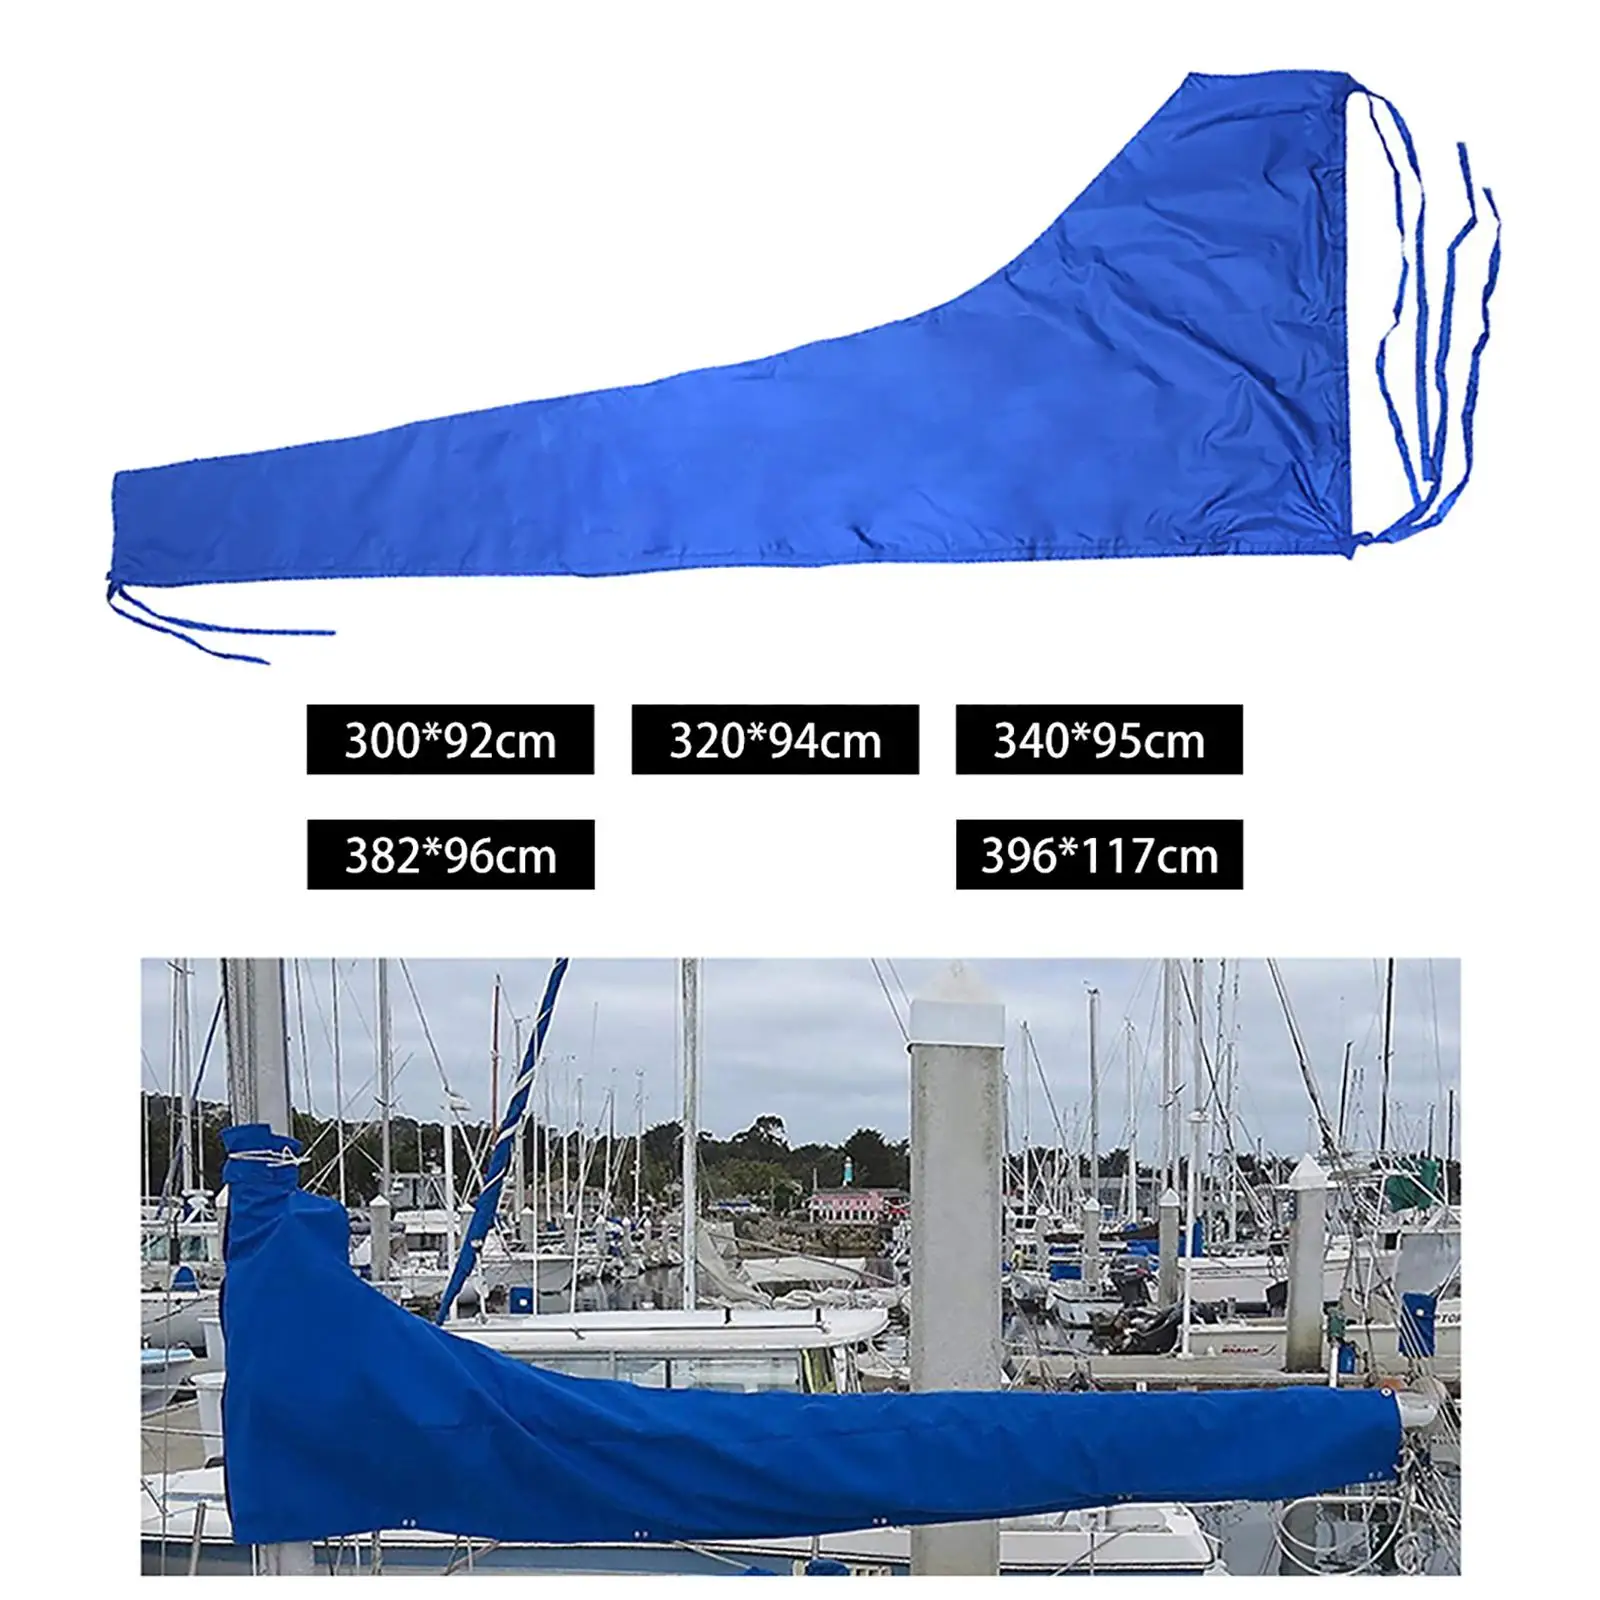 Waterproof Mainsail Boom Cover Dustproof Cover Sail Cover Snow Cover Boat Accessories for All Seasons Seamless Protection Blue